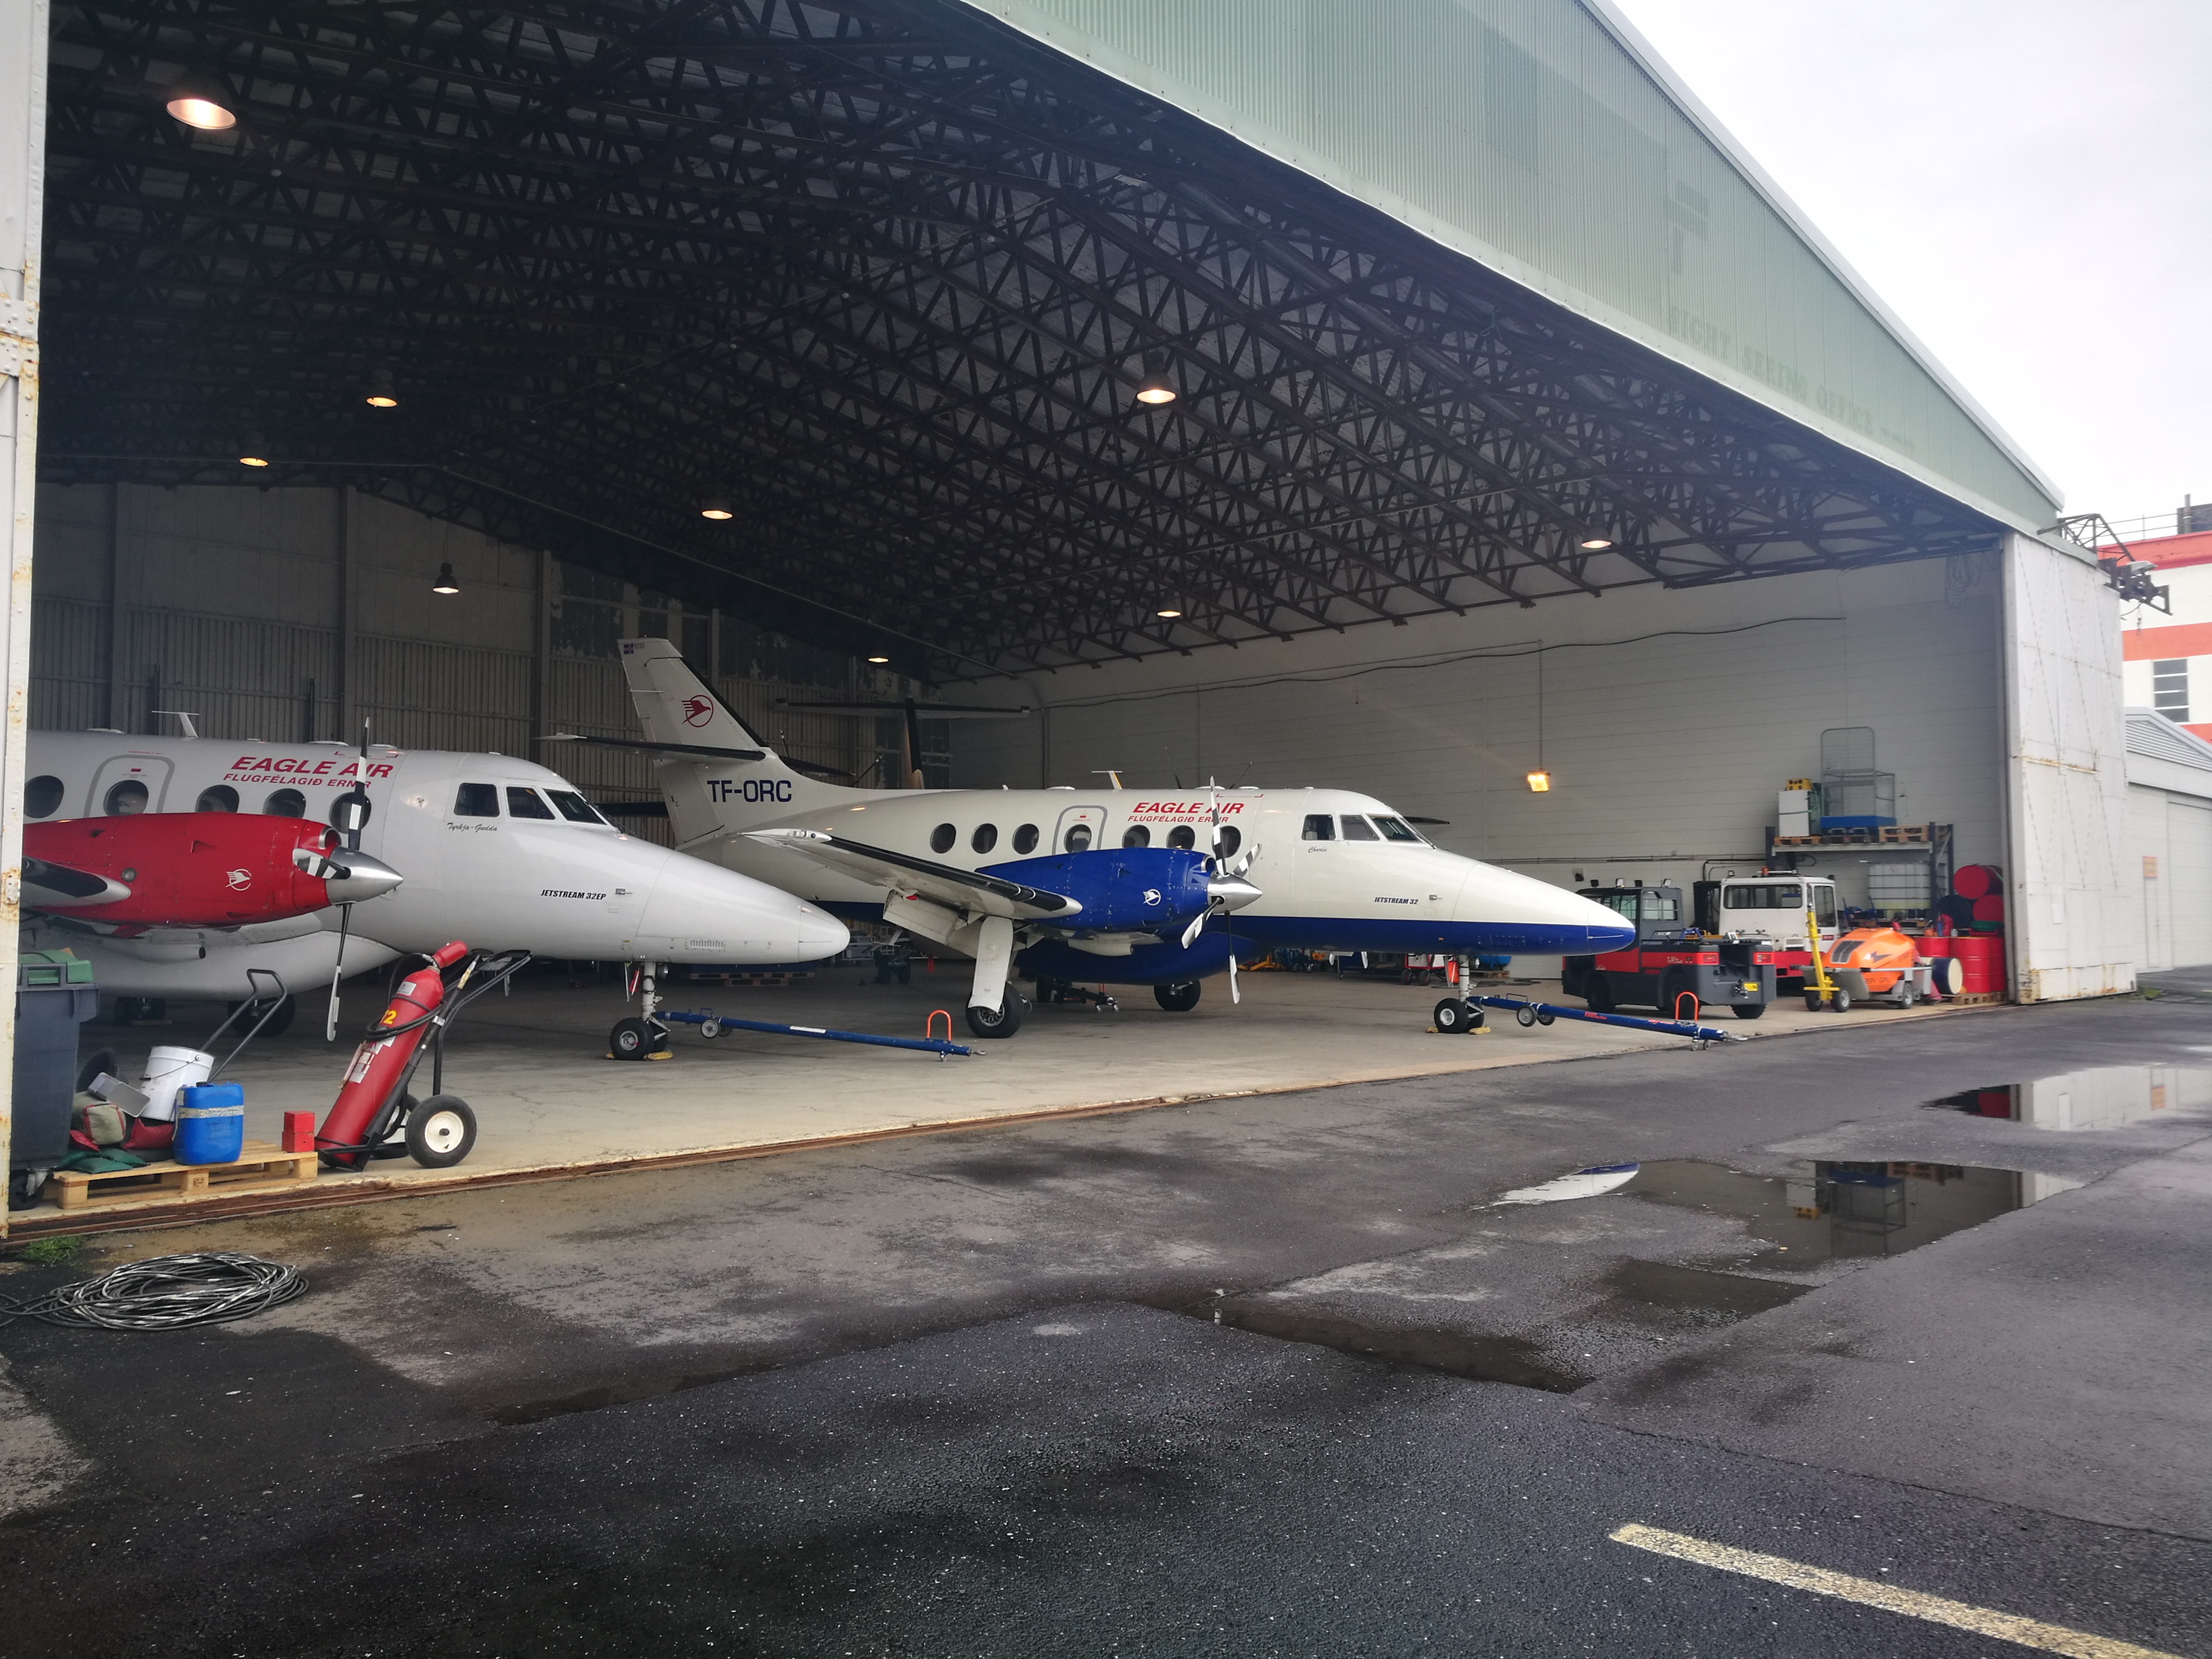 Eagle Air JetStream 32 (reg. TF-ORC and TF-ORD) in hangar of Reykjavik airport // Source: Flugblogg